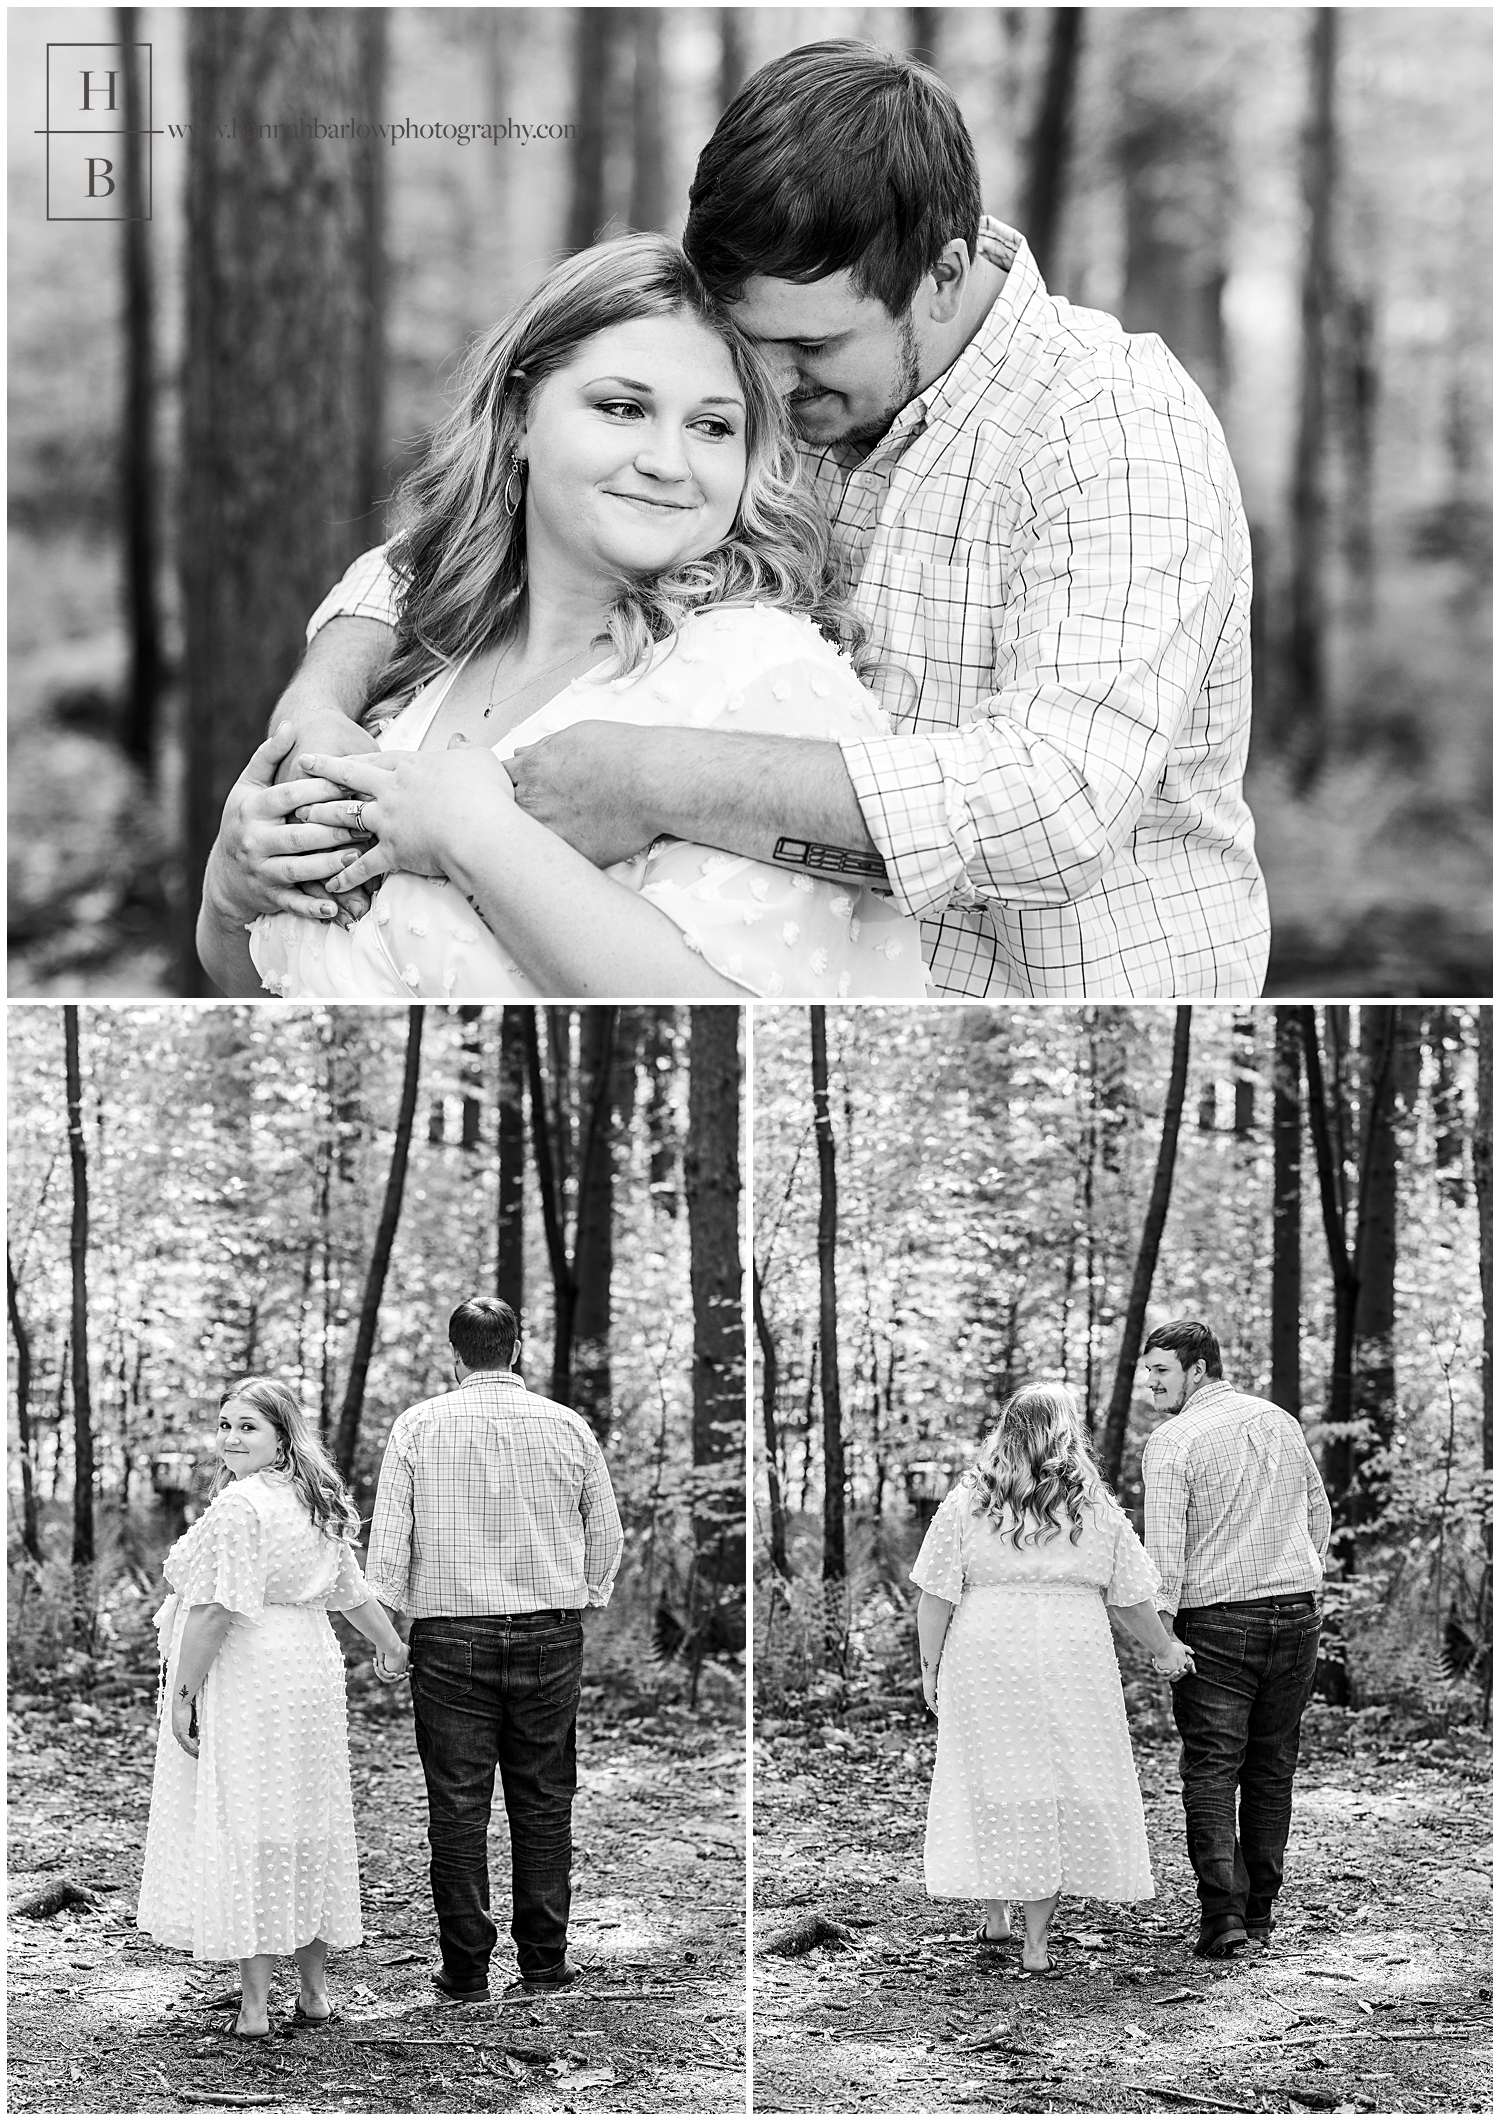 Black and white photos of couple embracing in forest for engagement photos